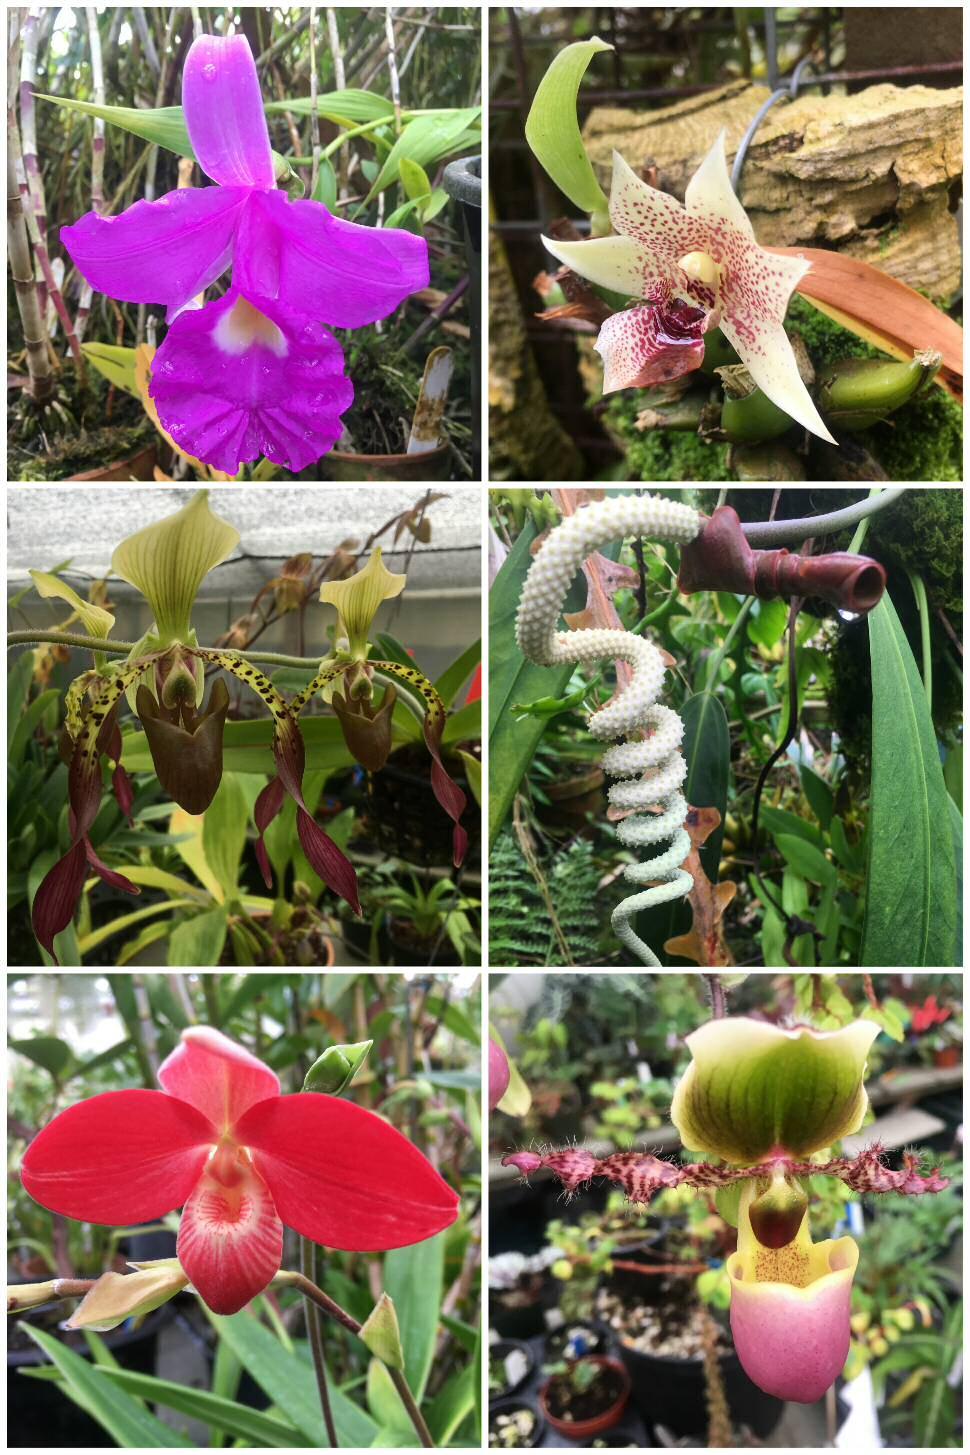 Our field trip to Pacifica to see orchid greenhouses was fun!